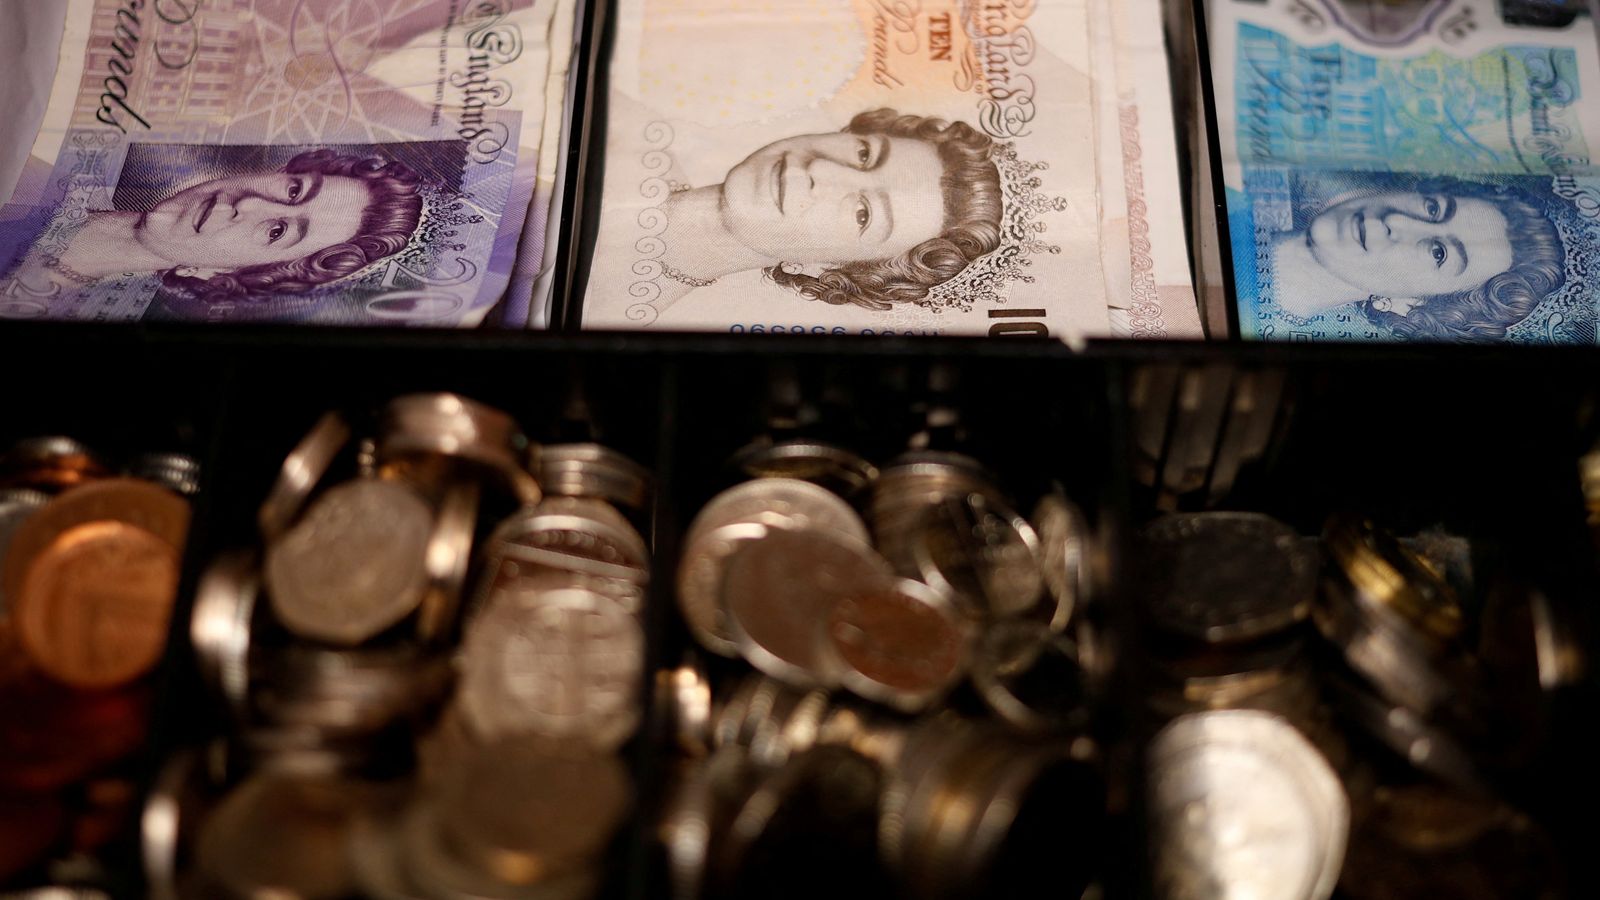 UK economy grows by 0.2% reversing initial contraction estimate